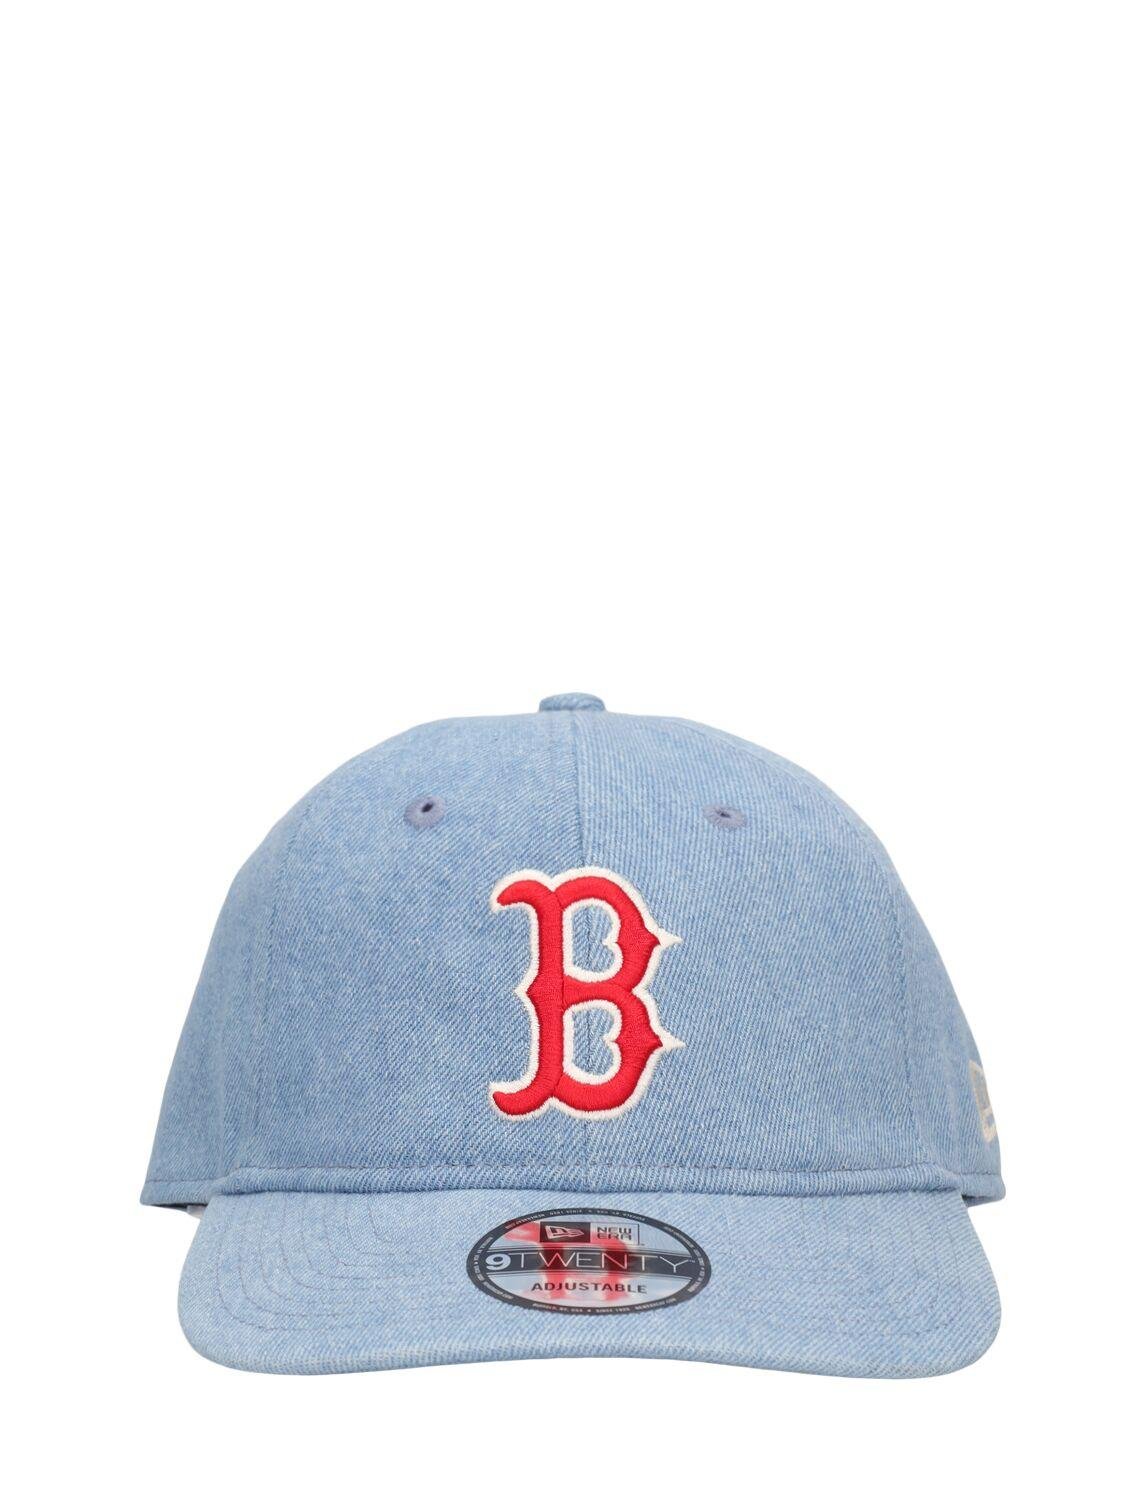 Washed Denim Boston Red Sox Cap by NEW ERA